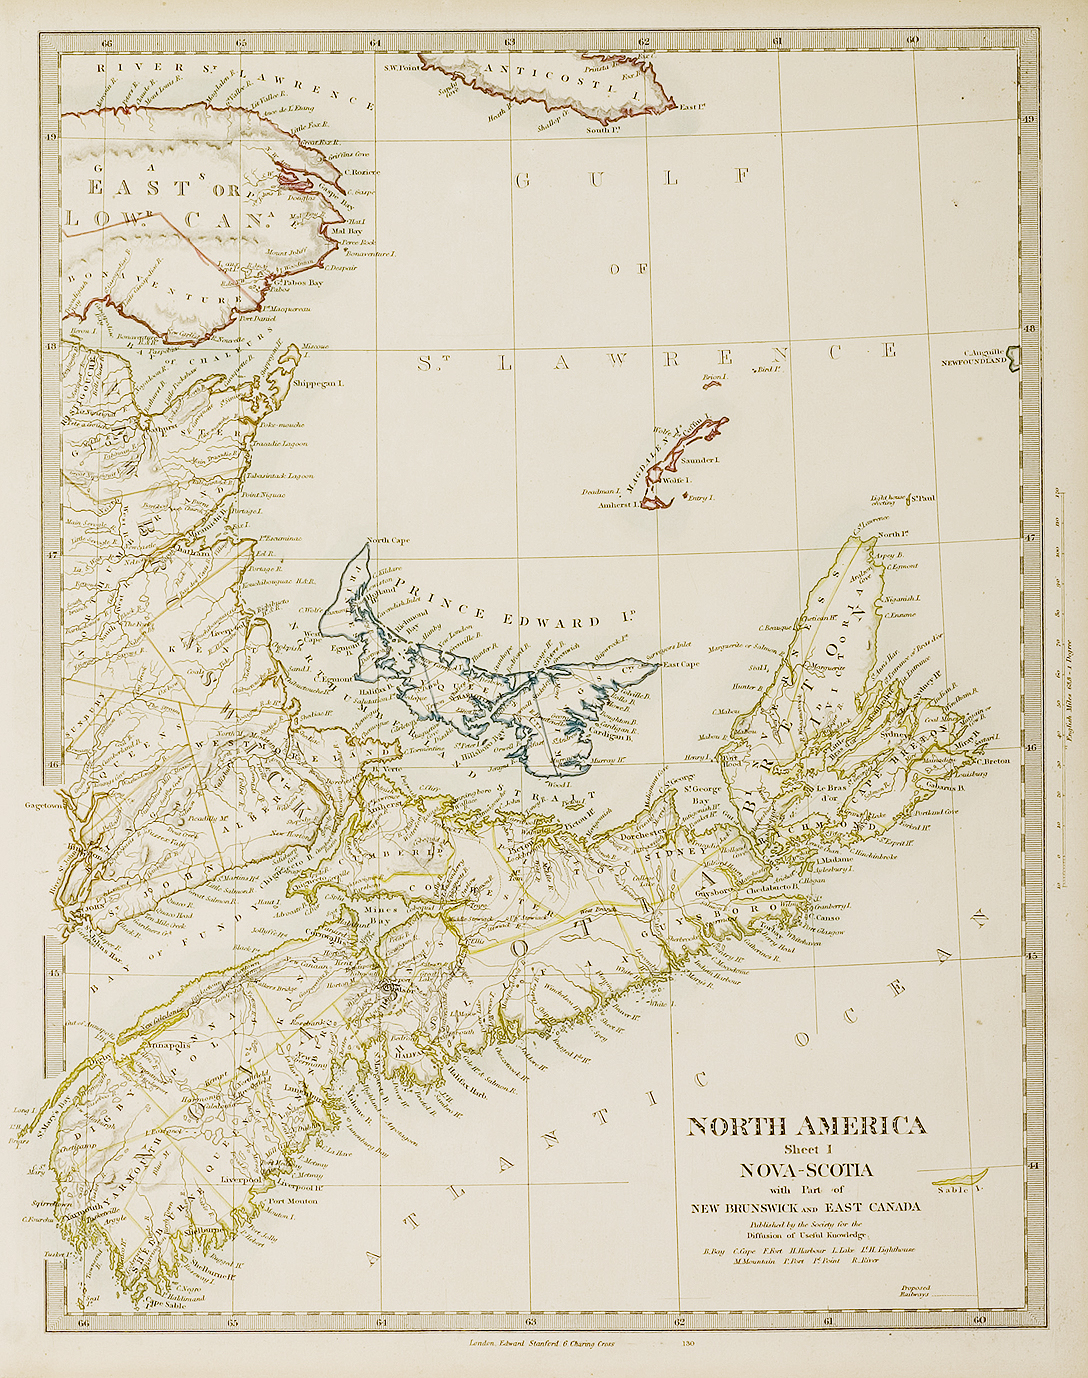 North America, Novia Scotia with part of New Brunswick and East Canada - Antique Print from 1832